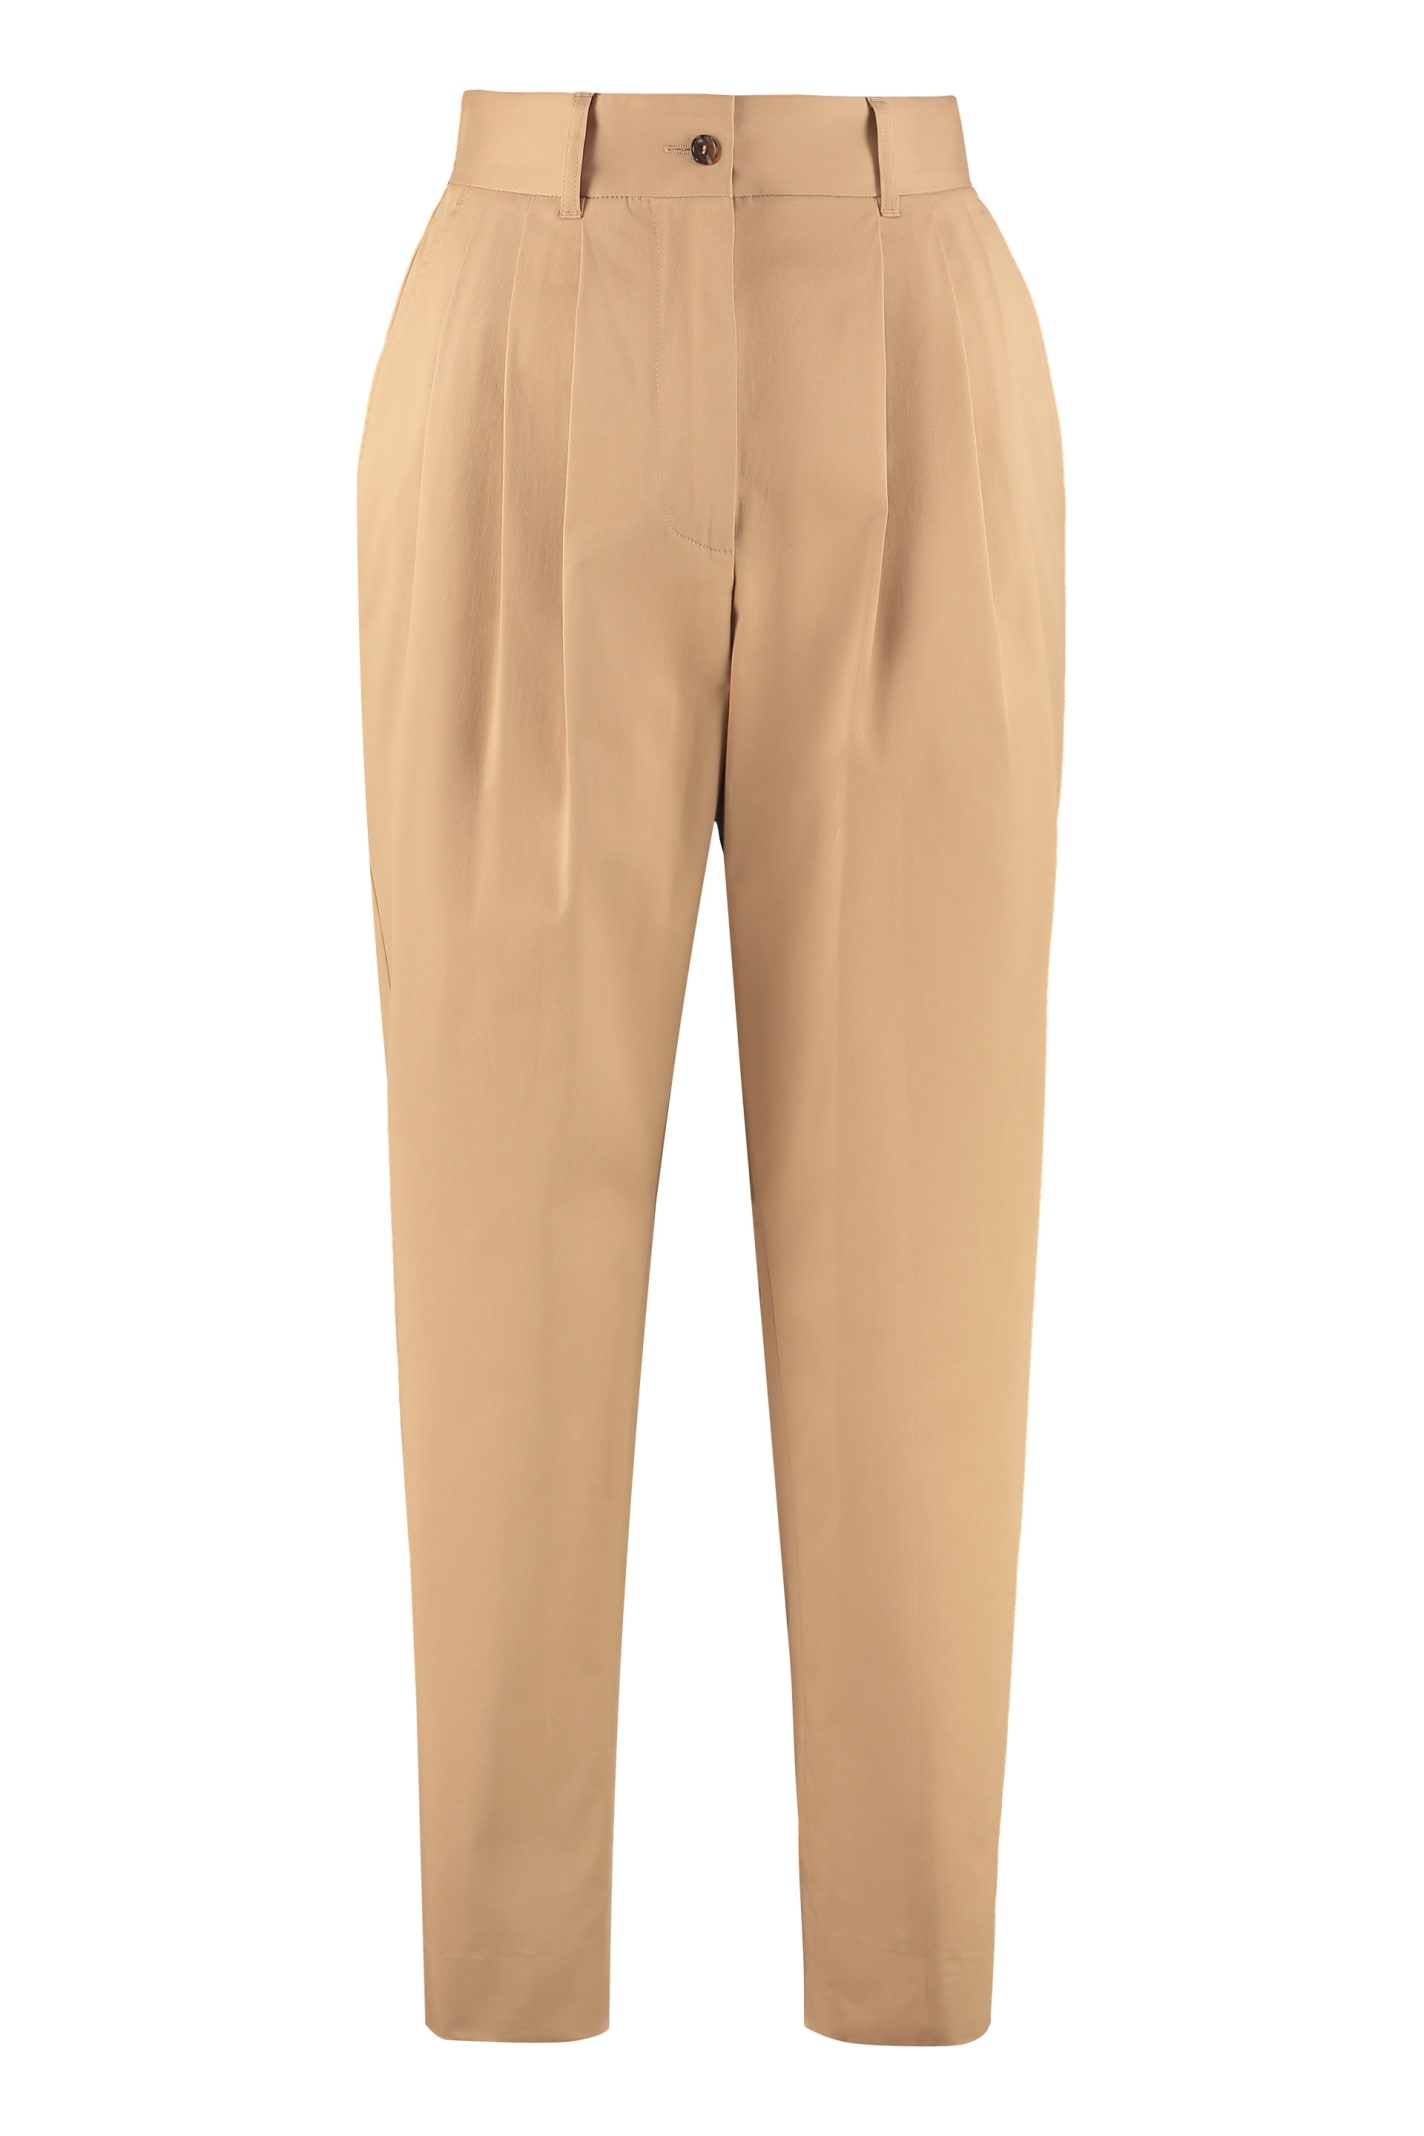 Dolce & Gabbana Cotton Trousers With Pleats